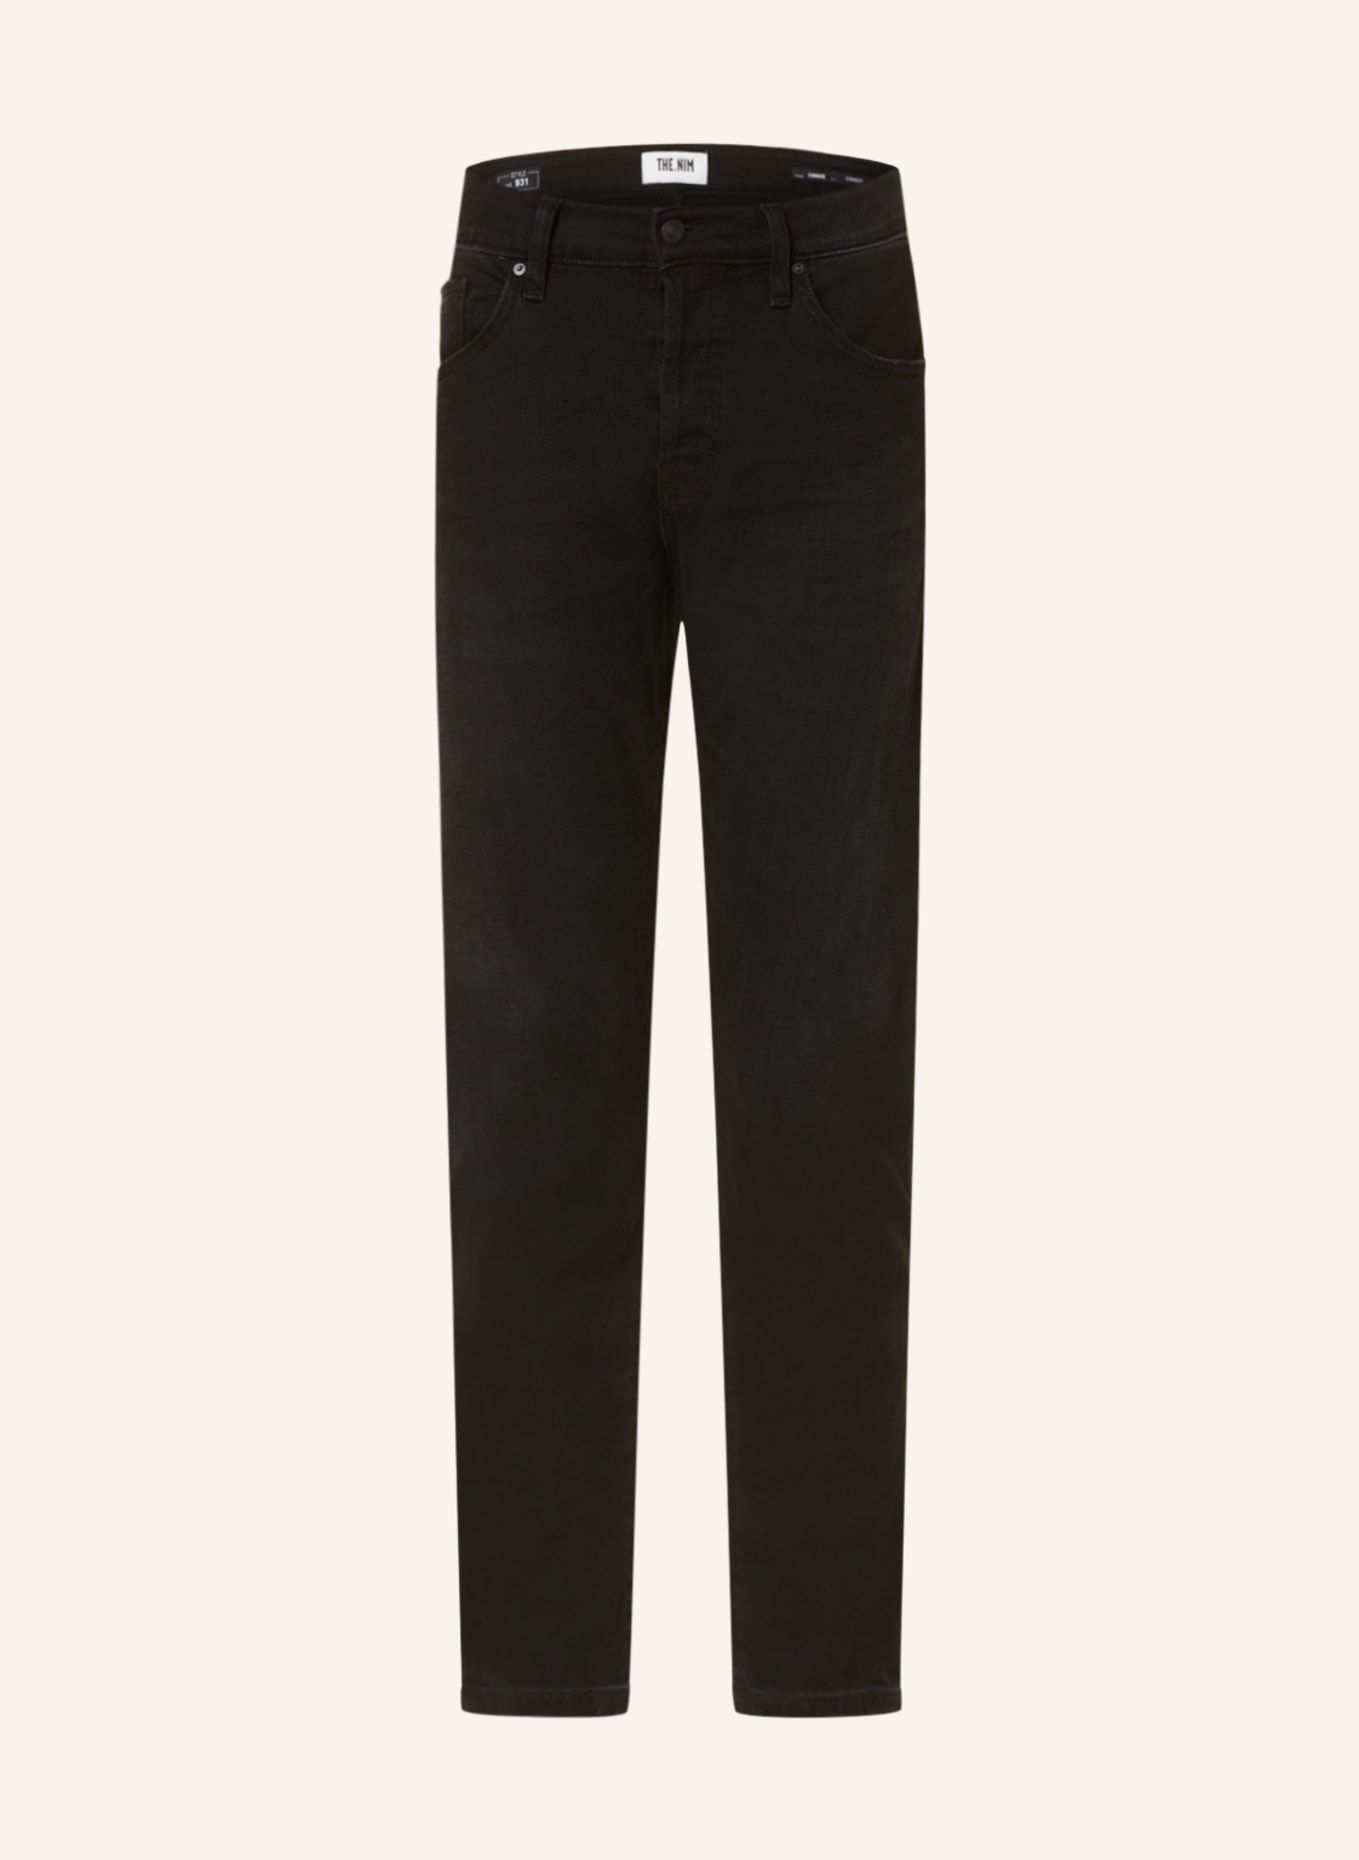 THE.NIM STANDARD Jeans CONNOR carrot fit, Color: W771-UBK USED BLACK (Image 1)